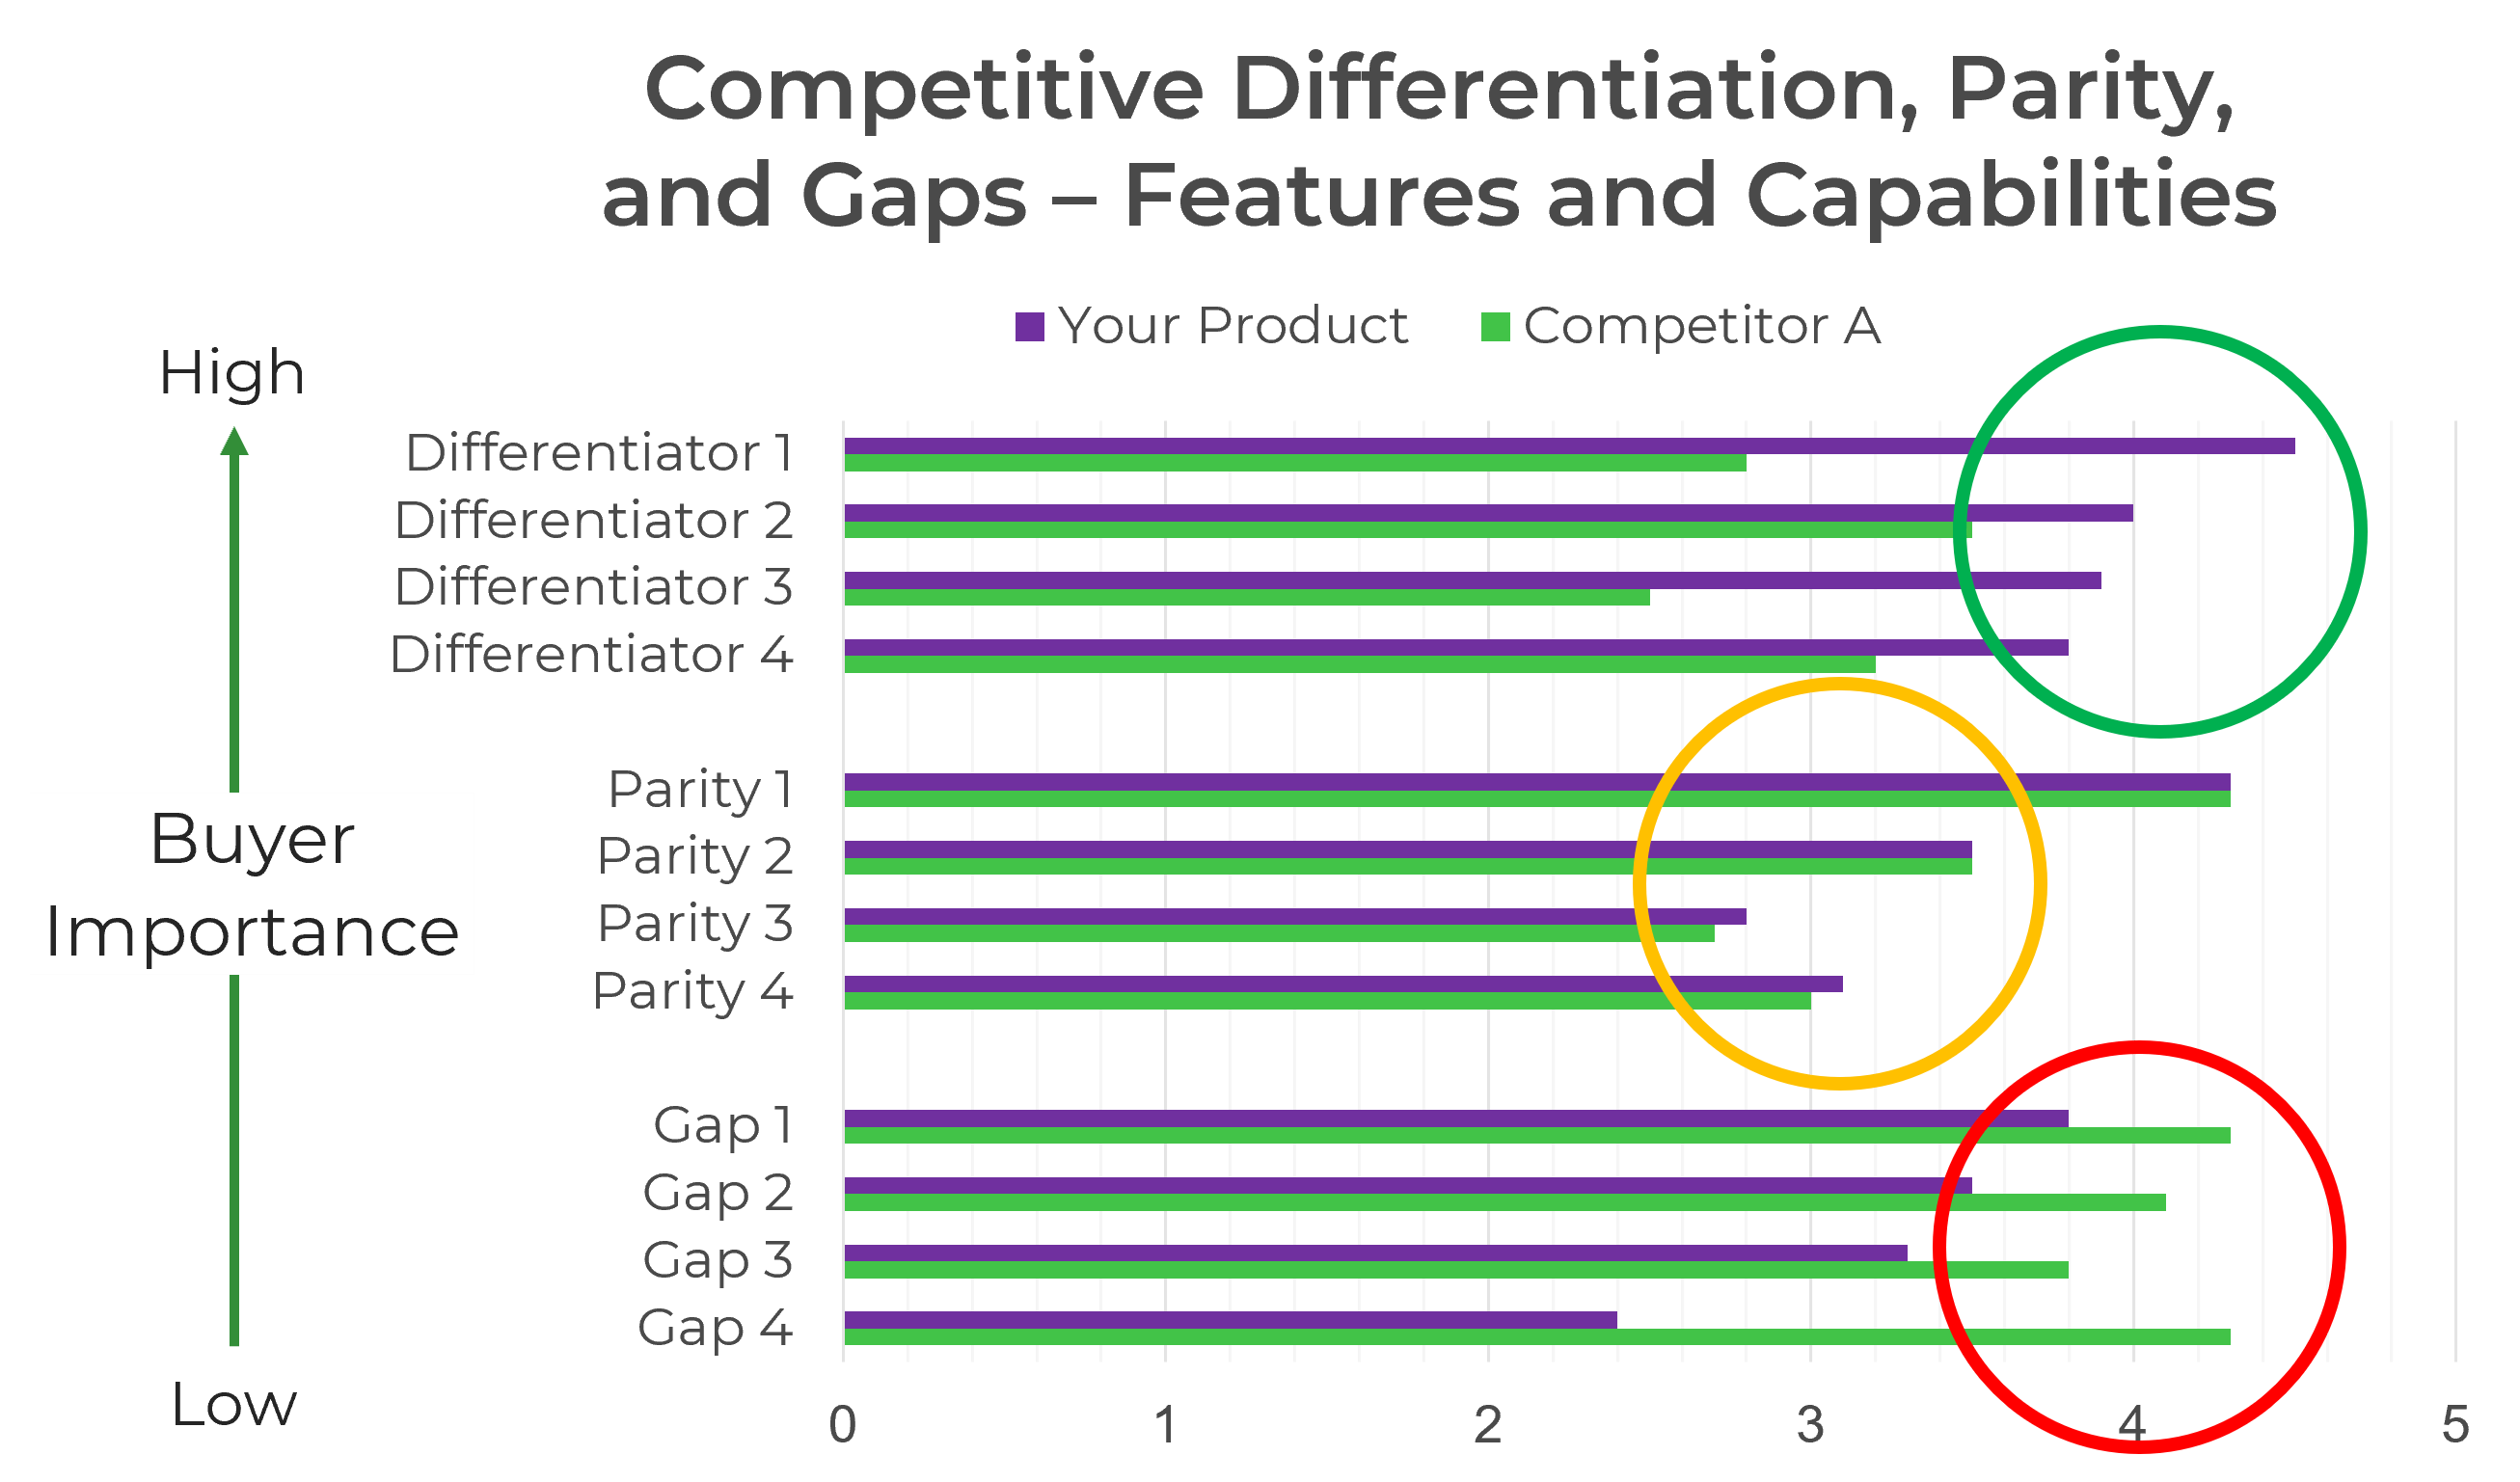 Example bar chart for 'Competitive Differentiation, Parity and Gaps – Features and Capabilities' comparing ratings of 'Your Product' and 'Competitor A' with high buyer importance at the top, low at the bottom, and rankings of each 'Differentiator', 'Parity', and 'Gap'.